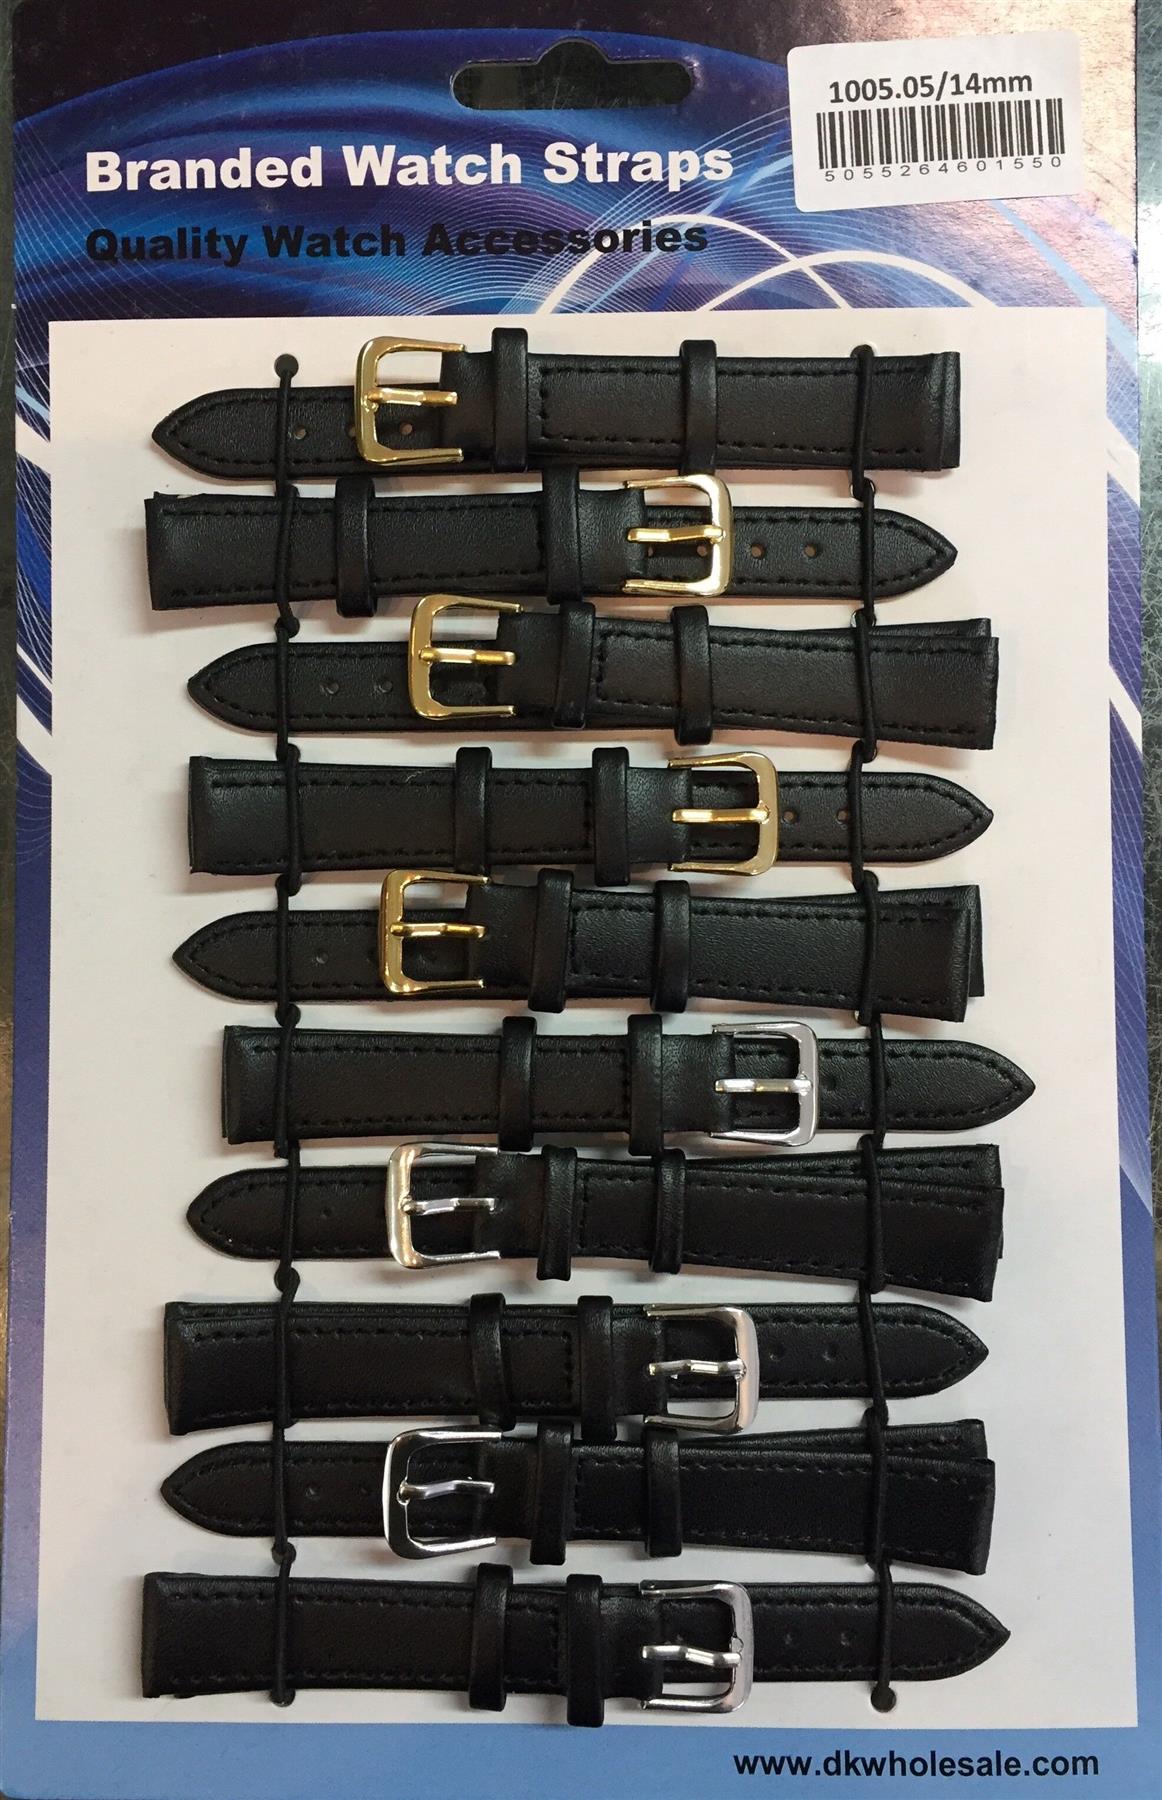 Leather Black Watch Straps Pk10 Available sizes 10mm To 24mm 1005.05